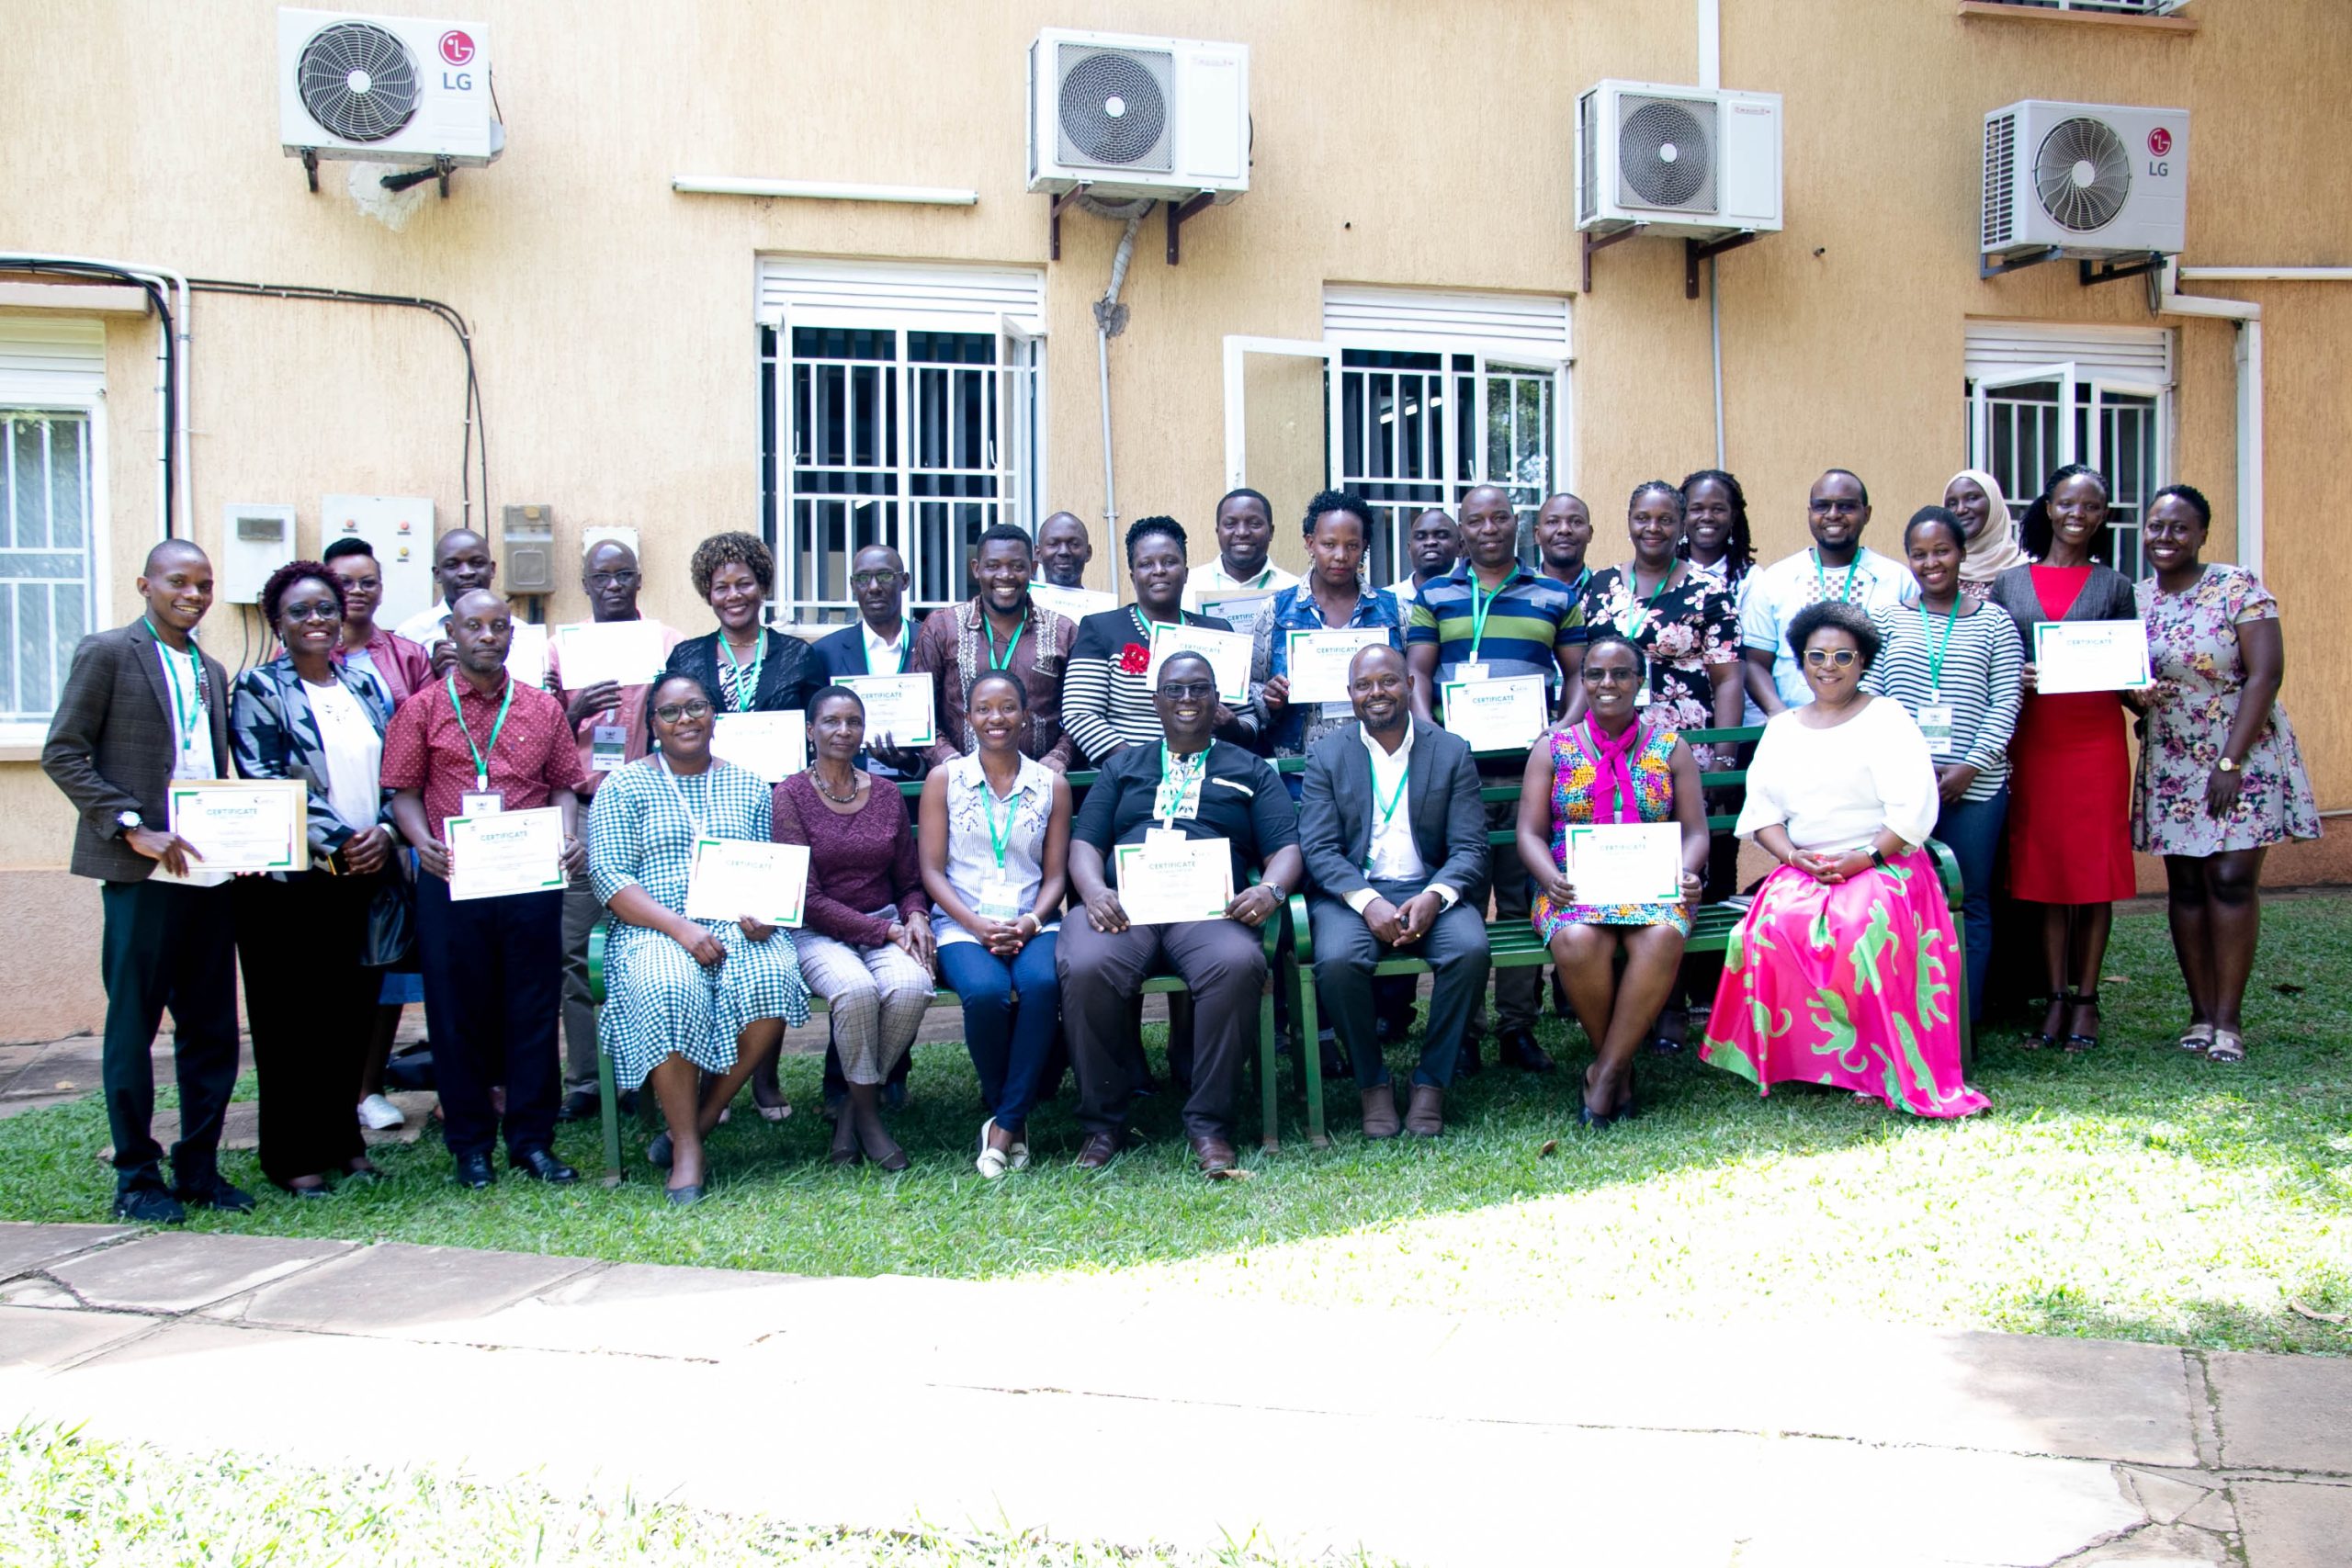 Trainees and Facilitators in a group photo after the Training of Trainers (ToT) Academic, Professional and Administrative staff -APAS course. Makerere University School of Public Health, Plot 28 House 30, Upper Kololo Terrace, Kampala Uganda, East Africa.